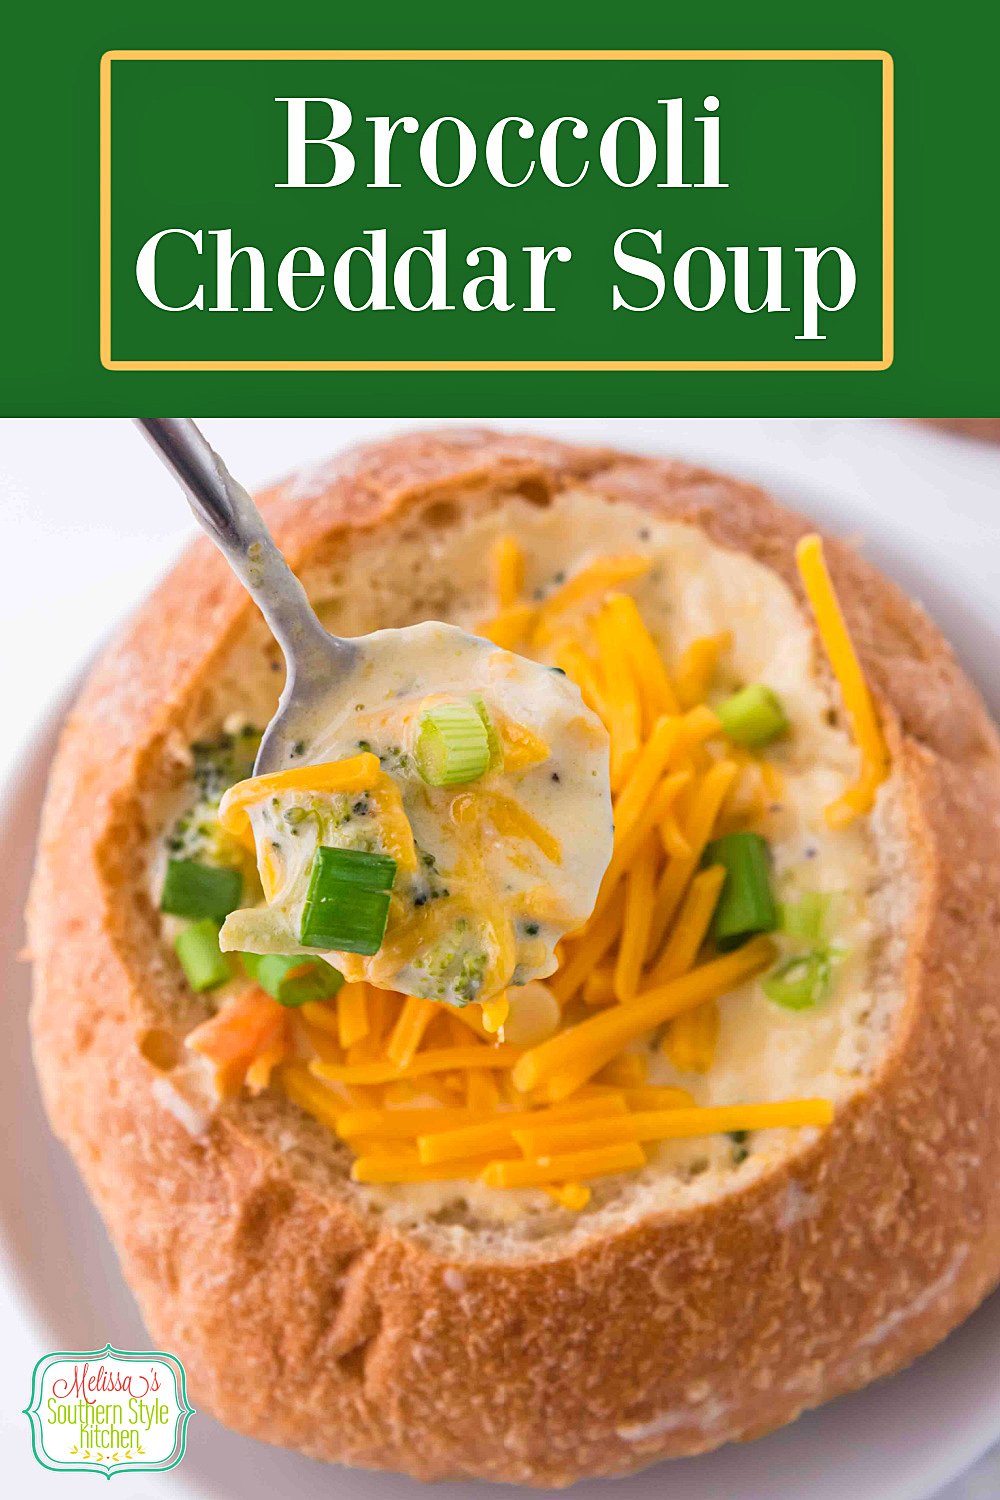 This Copycat Broccoli Cheddar Soup features fresh broccoli florets, carrots and onions and a perfectly seasoned cheddar cheese broth #broccolicheesesoup #copycatbroccolicheddarsoup #panerabroccolicheddarsoup #broccolicheese #broccolicheeserecipes #souprecipes via @melissasssk